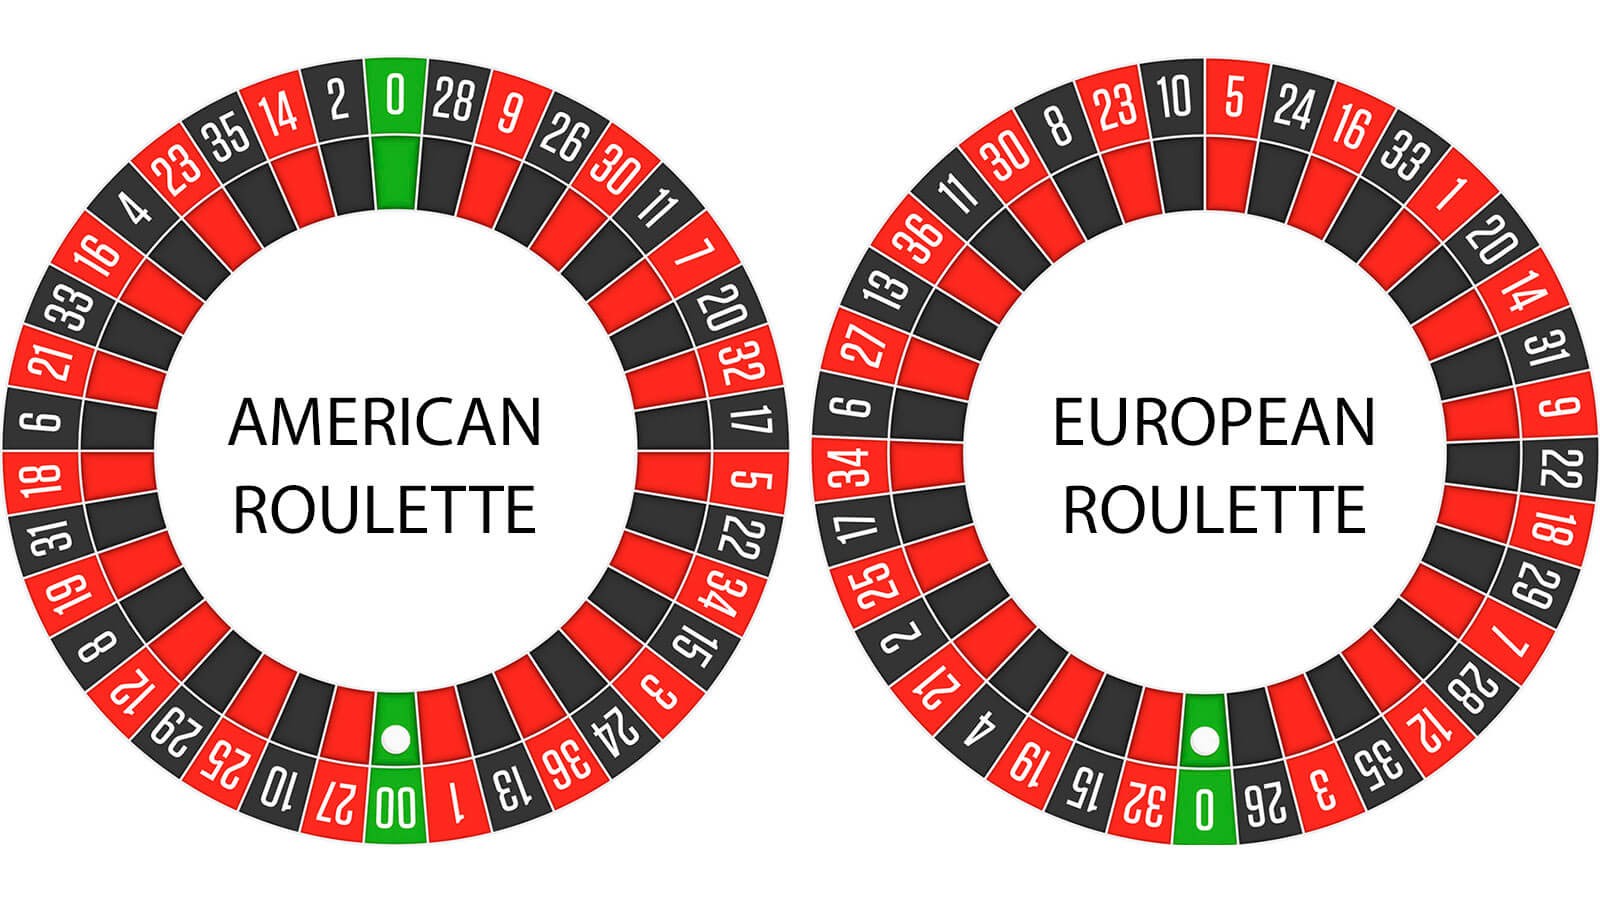 Comparison between American and European roulette wheels